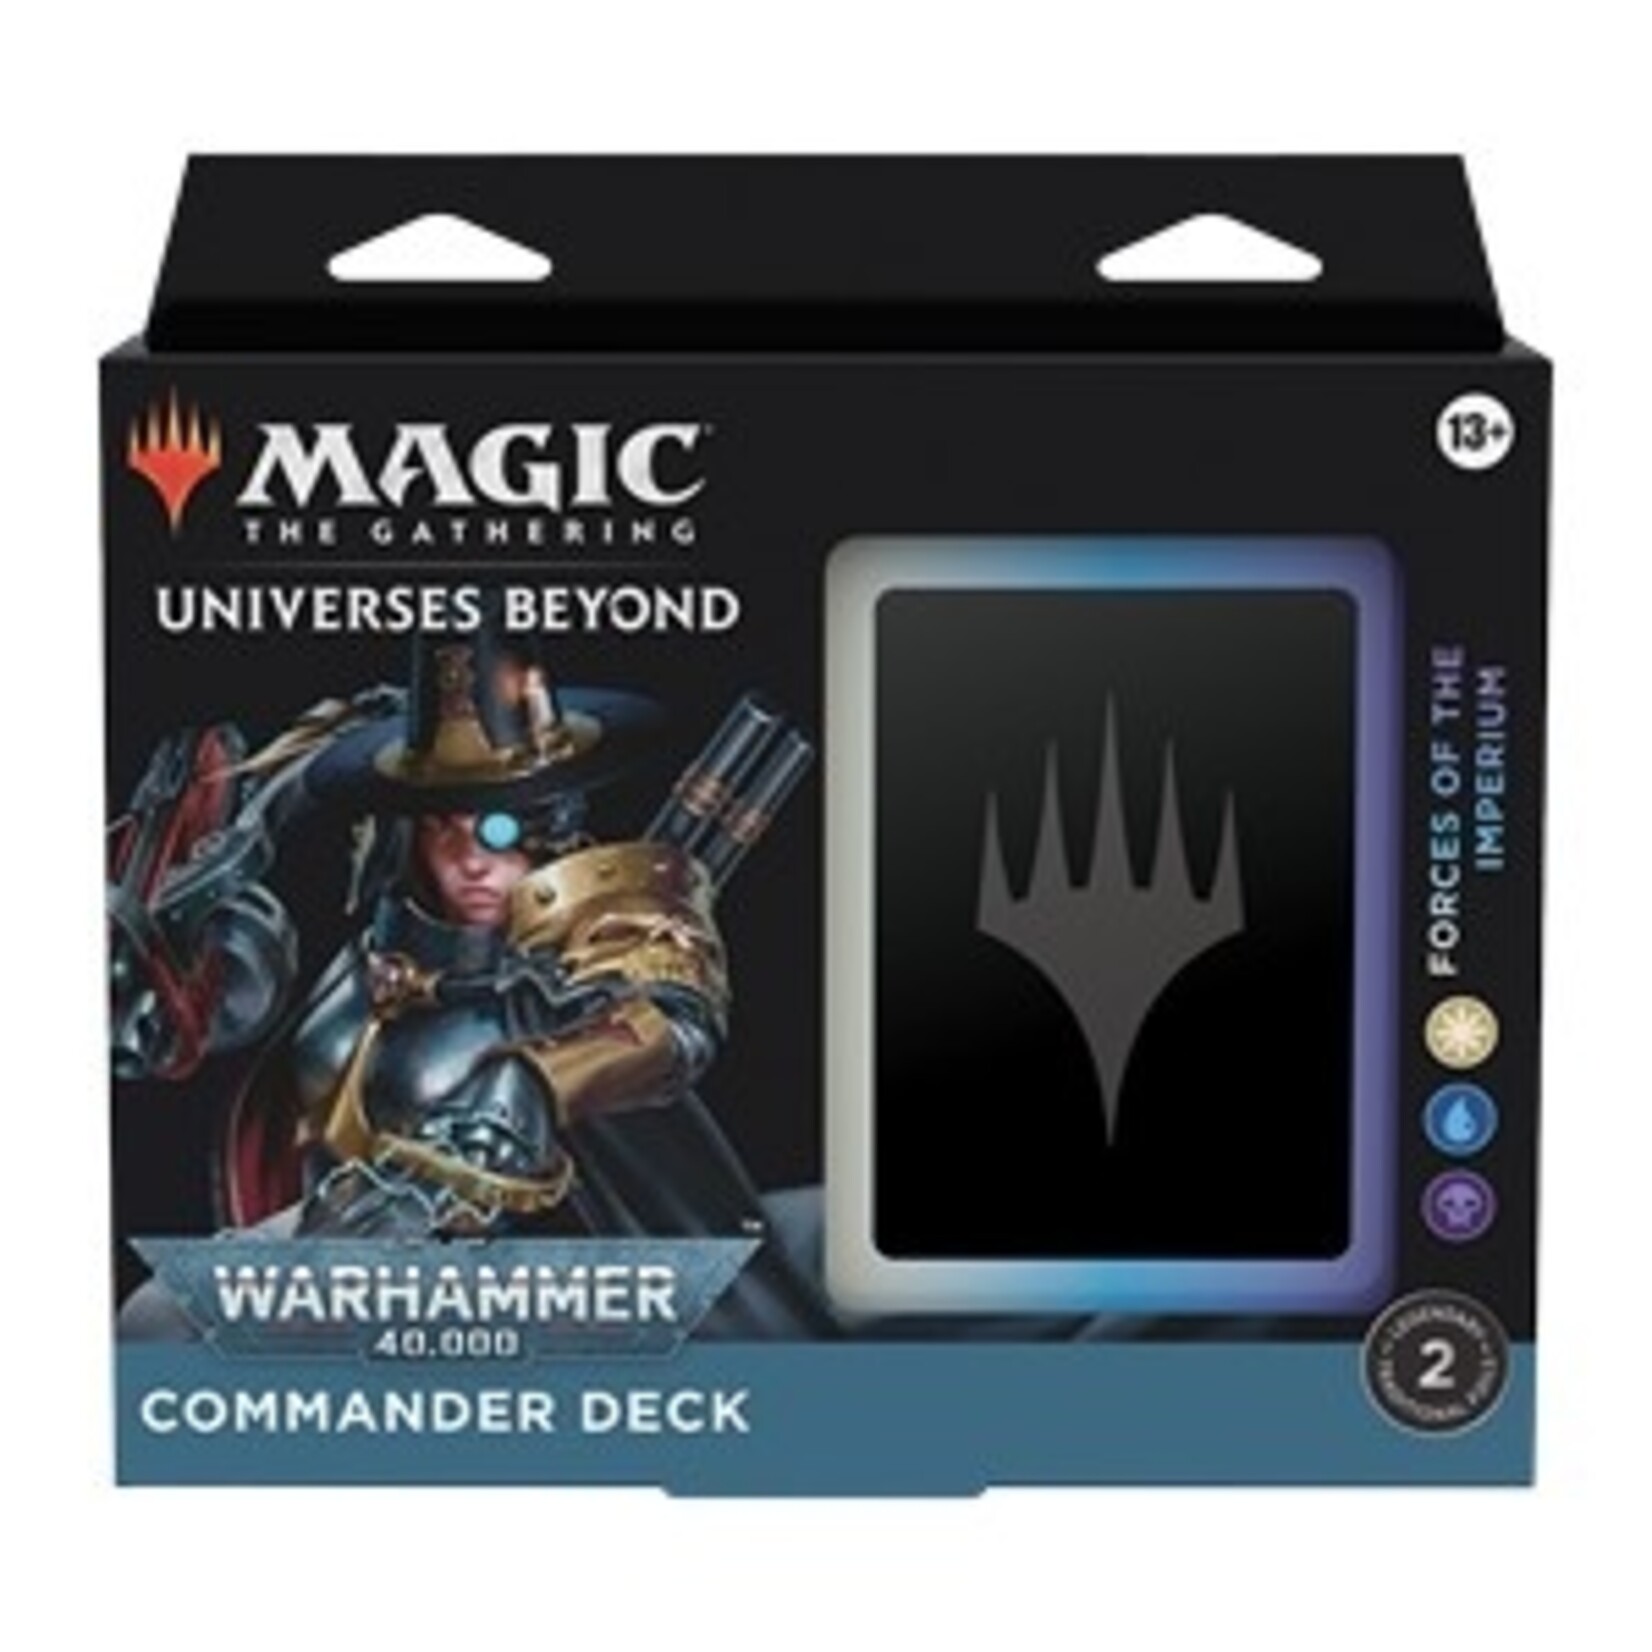 Magic the gathering Magic the Gathering - Warhammer 40,000: "Forces of the Imperium" Commander Deck